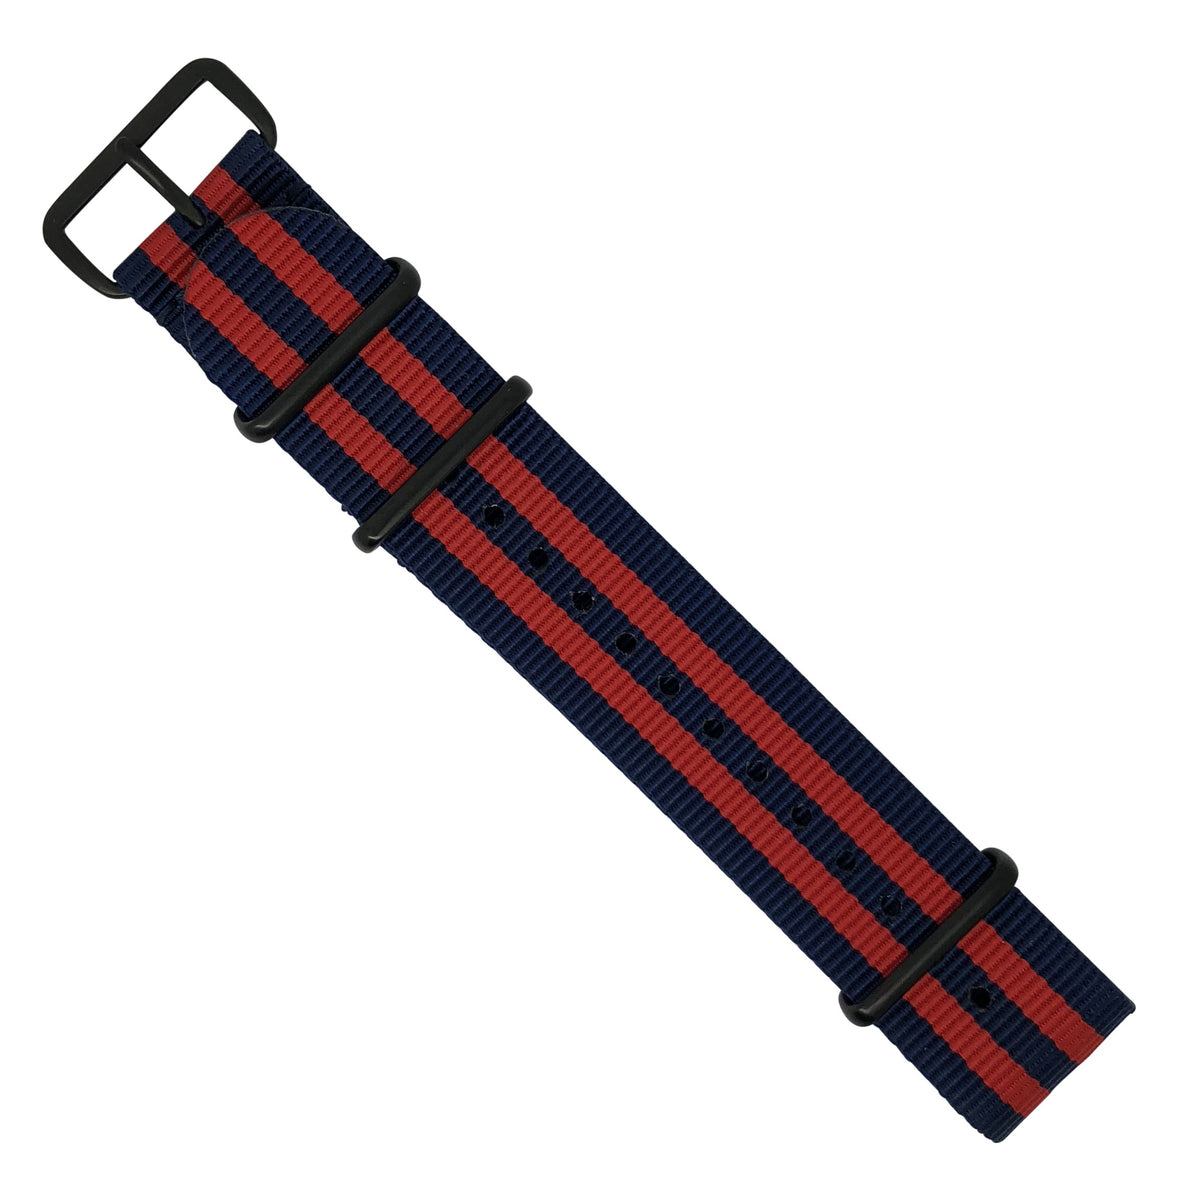 Premium Nato Strap in Navy Red Small Stripes - Nomad Watch Works SG